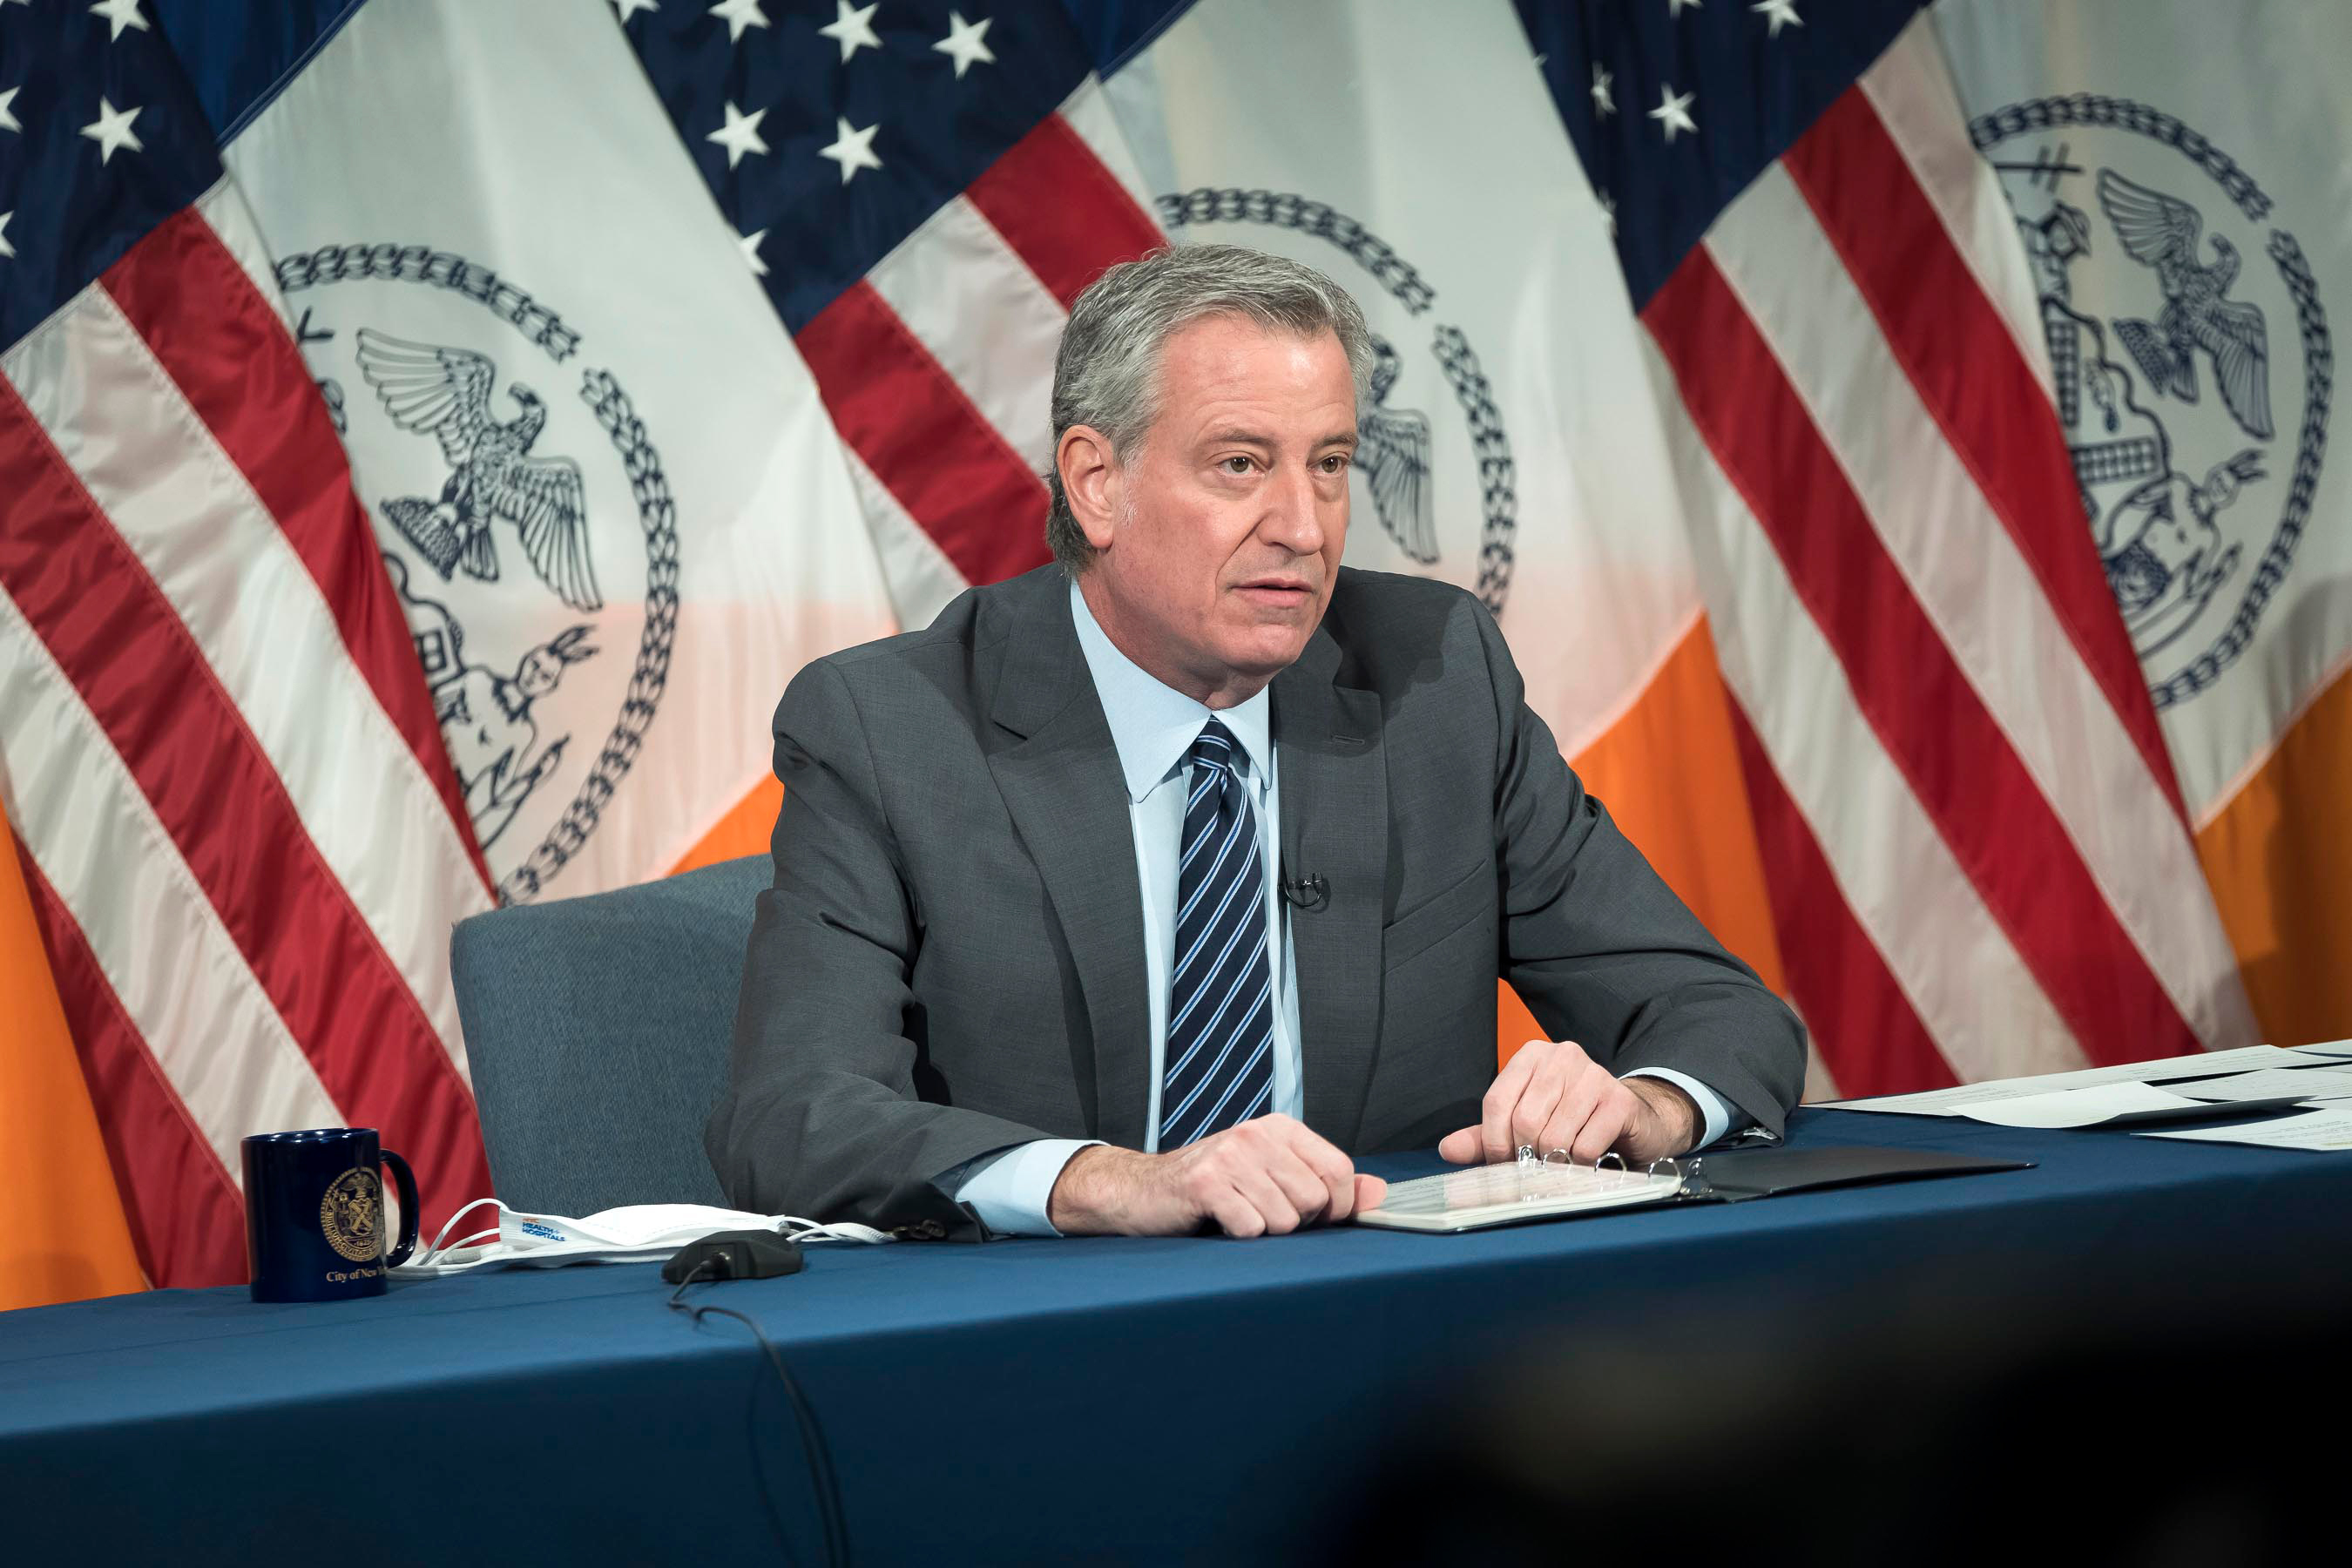 Mayor Bill de Blasio holds a press conference at City Hall, March 10, 2021.